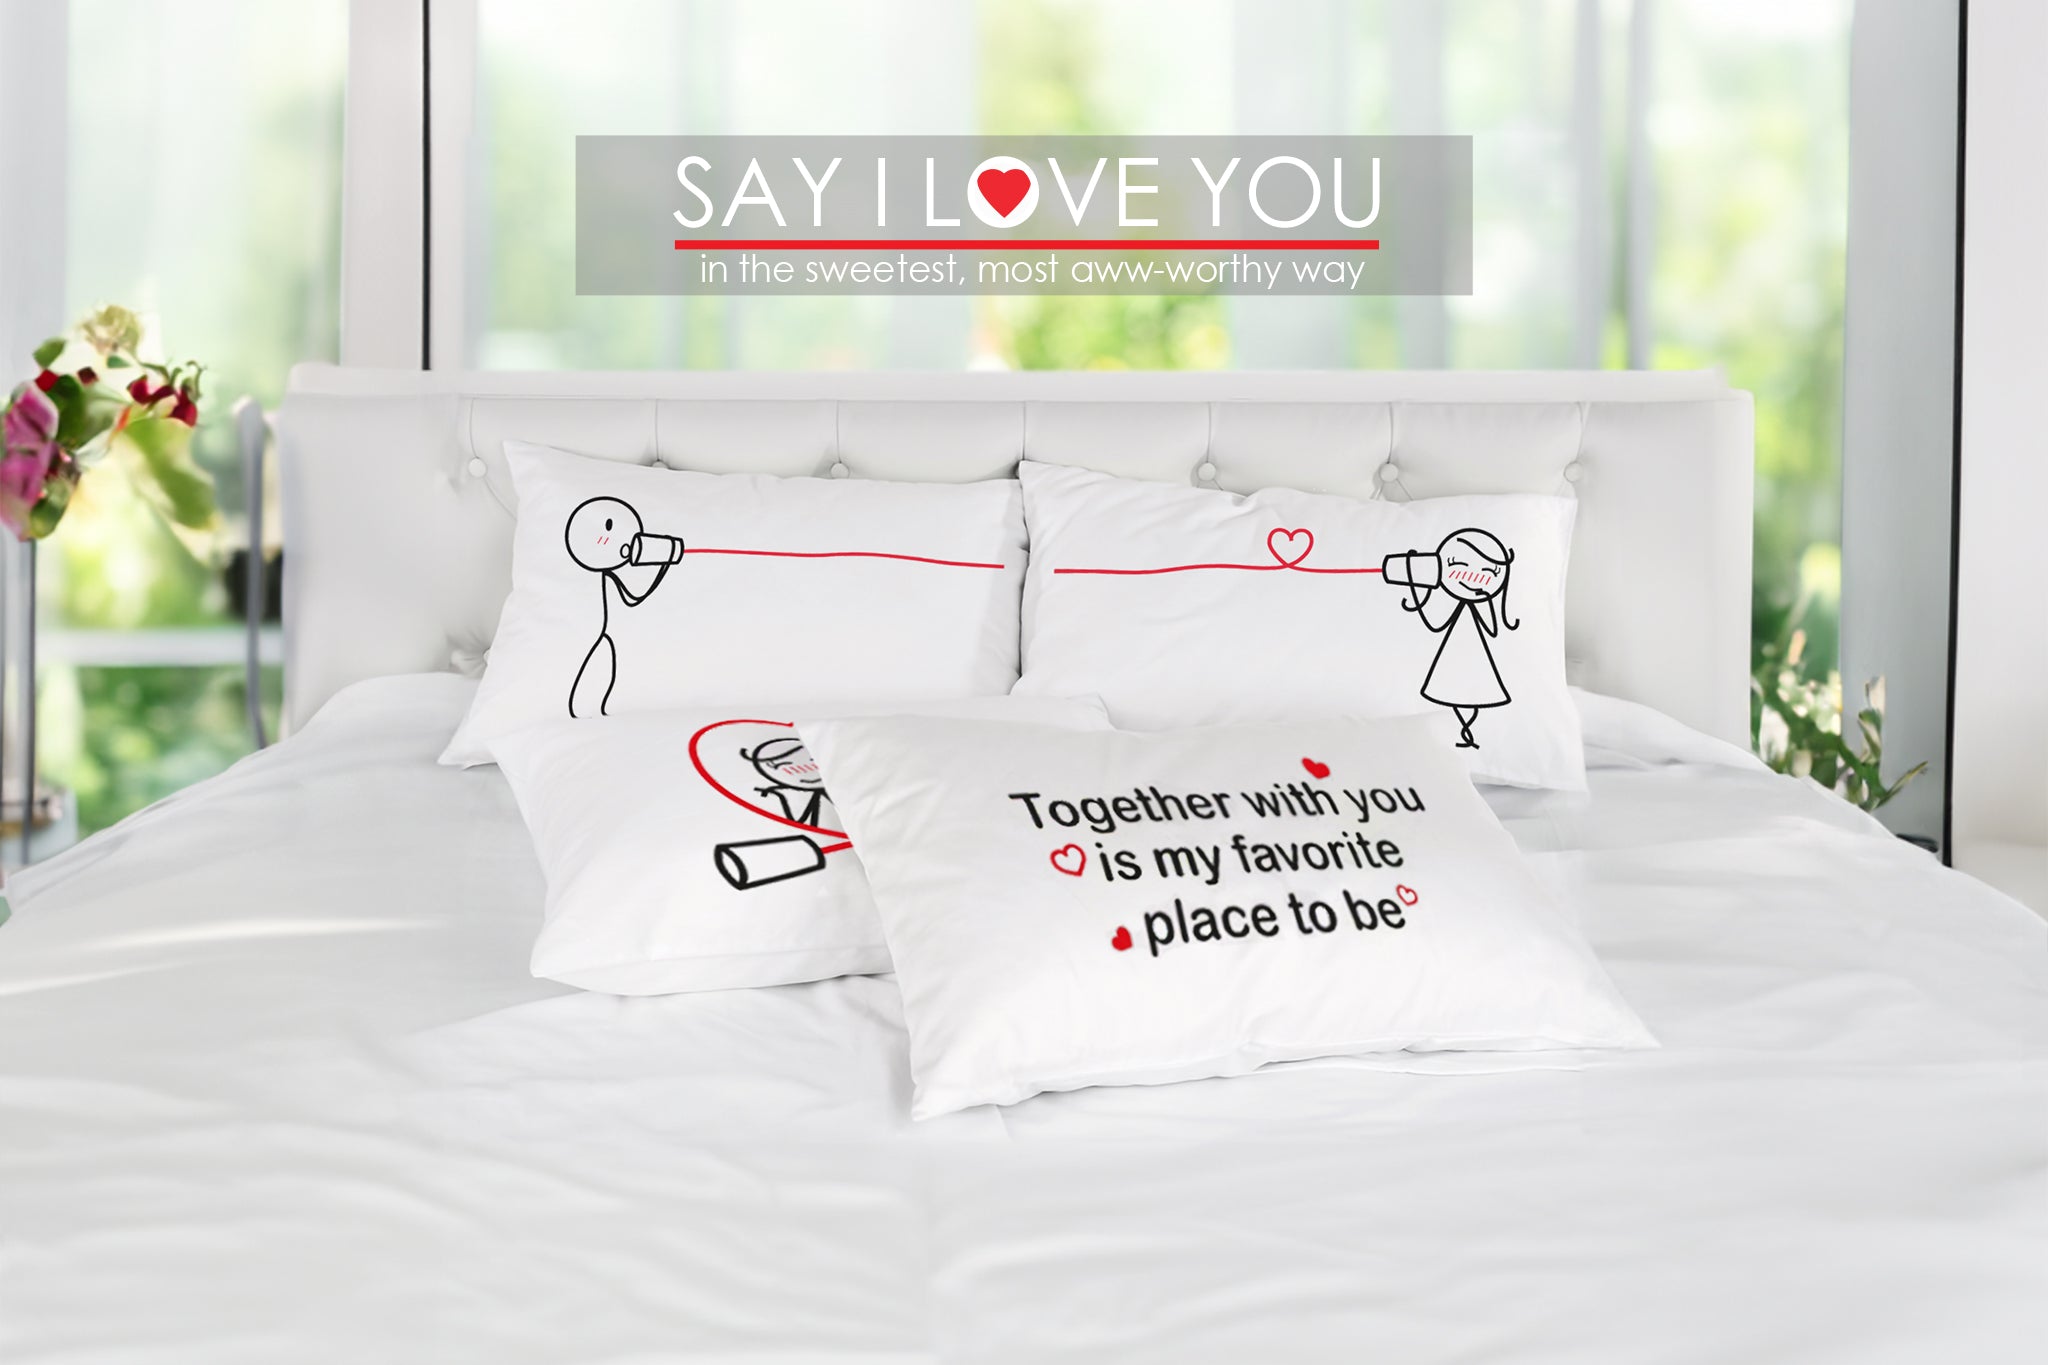 BoldLoft Couples Gift Sets : Gifts for Couples